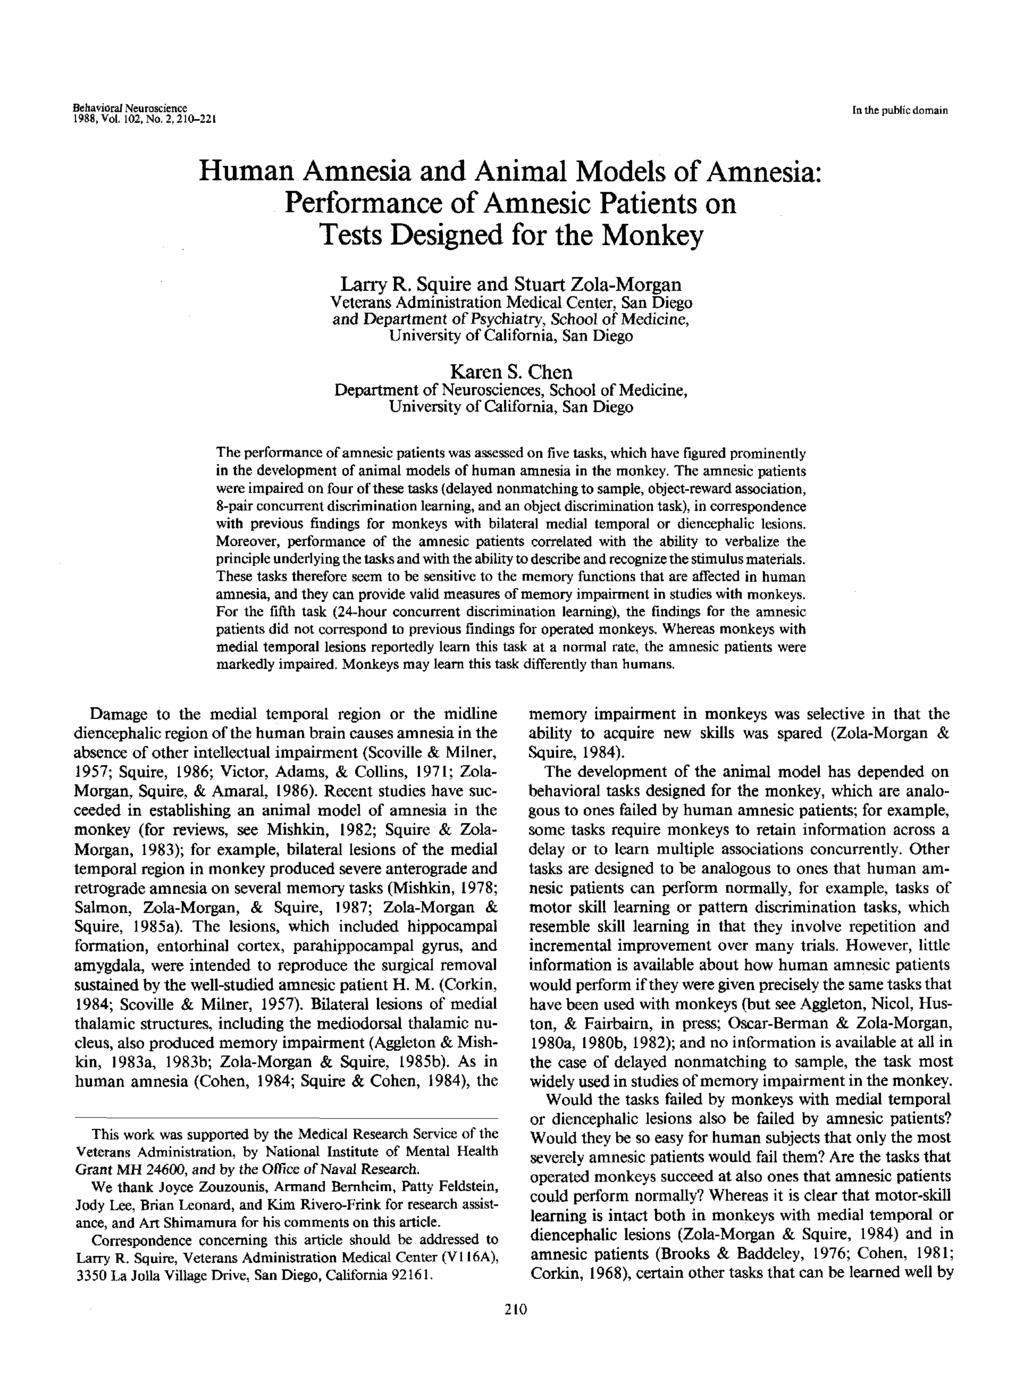 Behavioral Neuroscience 1988, Vol. 102, No. 2,210-221 In the public domain Human Amnesia and Animal Models of Amnesia: Performance of Amnesic Patients on Tests Designed for the Monkey Larry R.